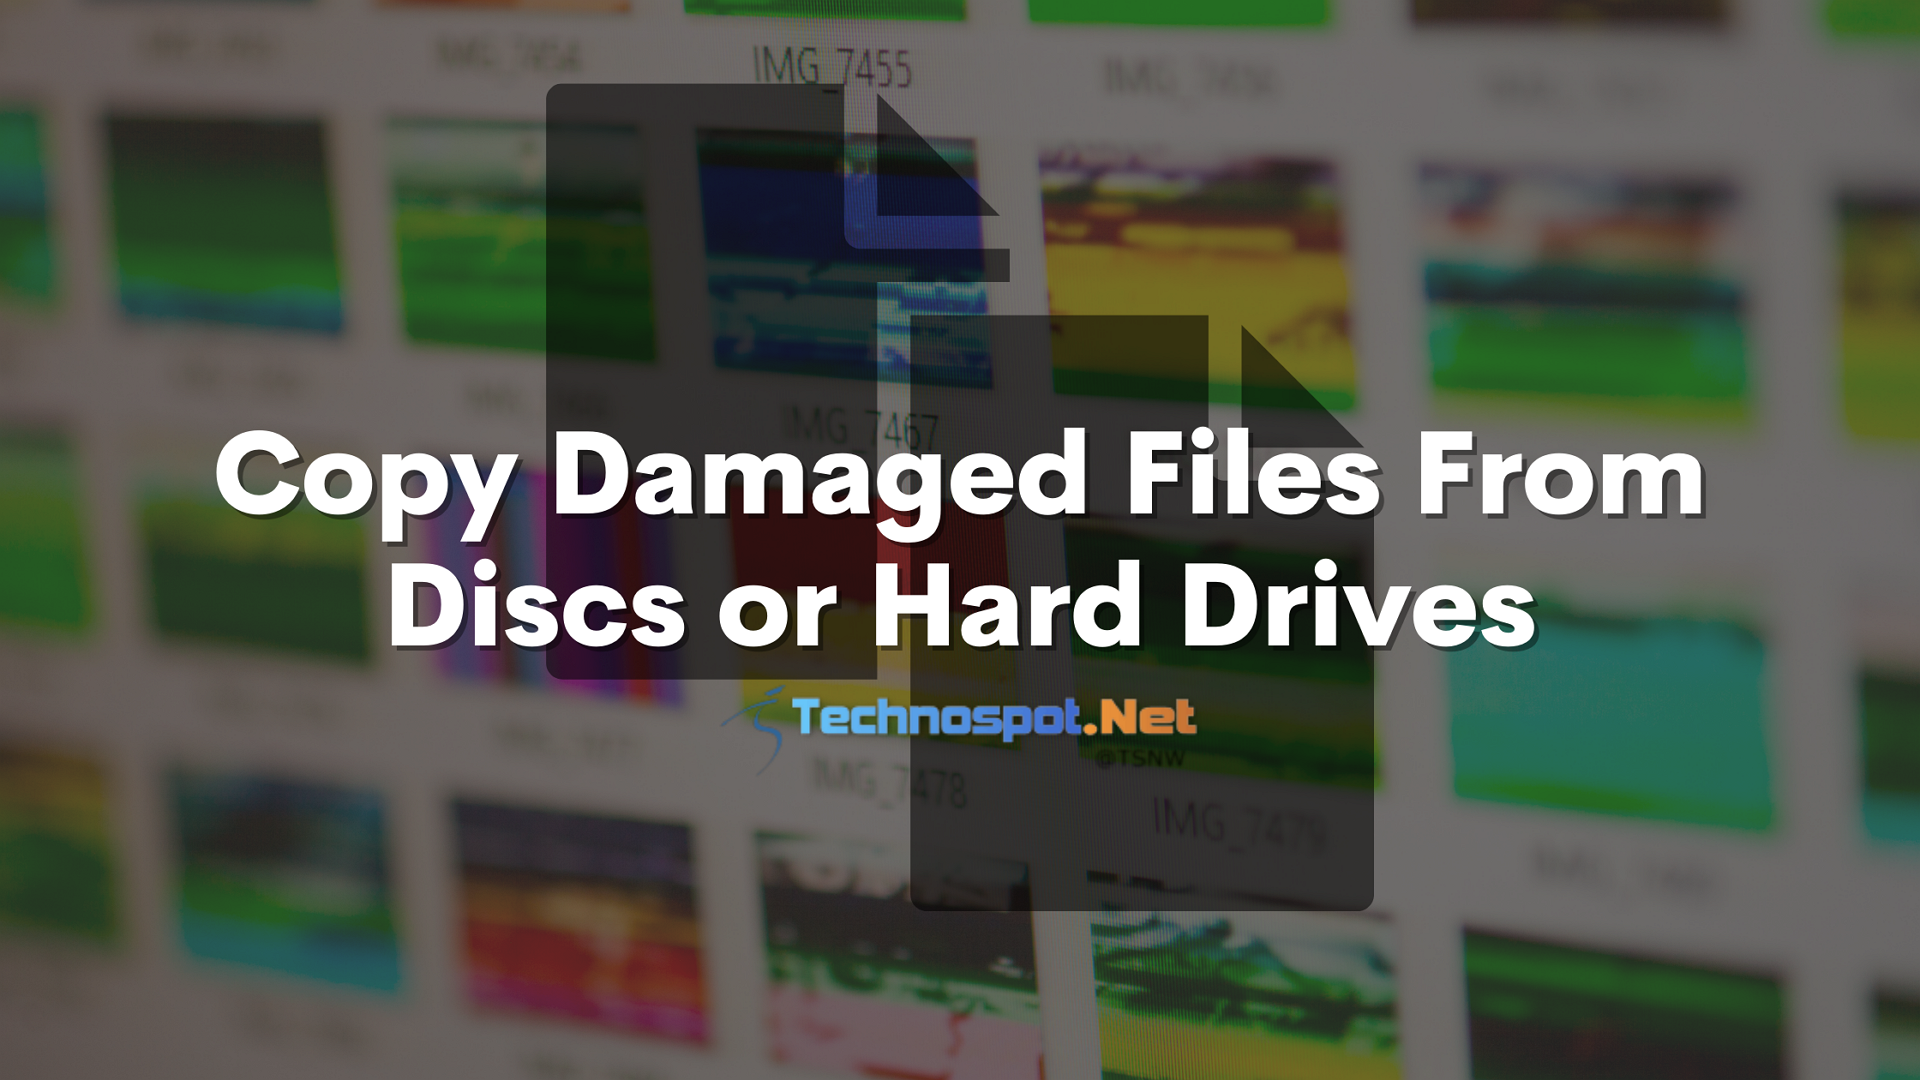 How To Copy Damaged Files From Hard Drive or USB or Discs